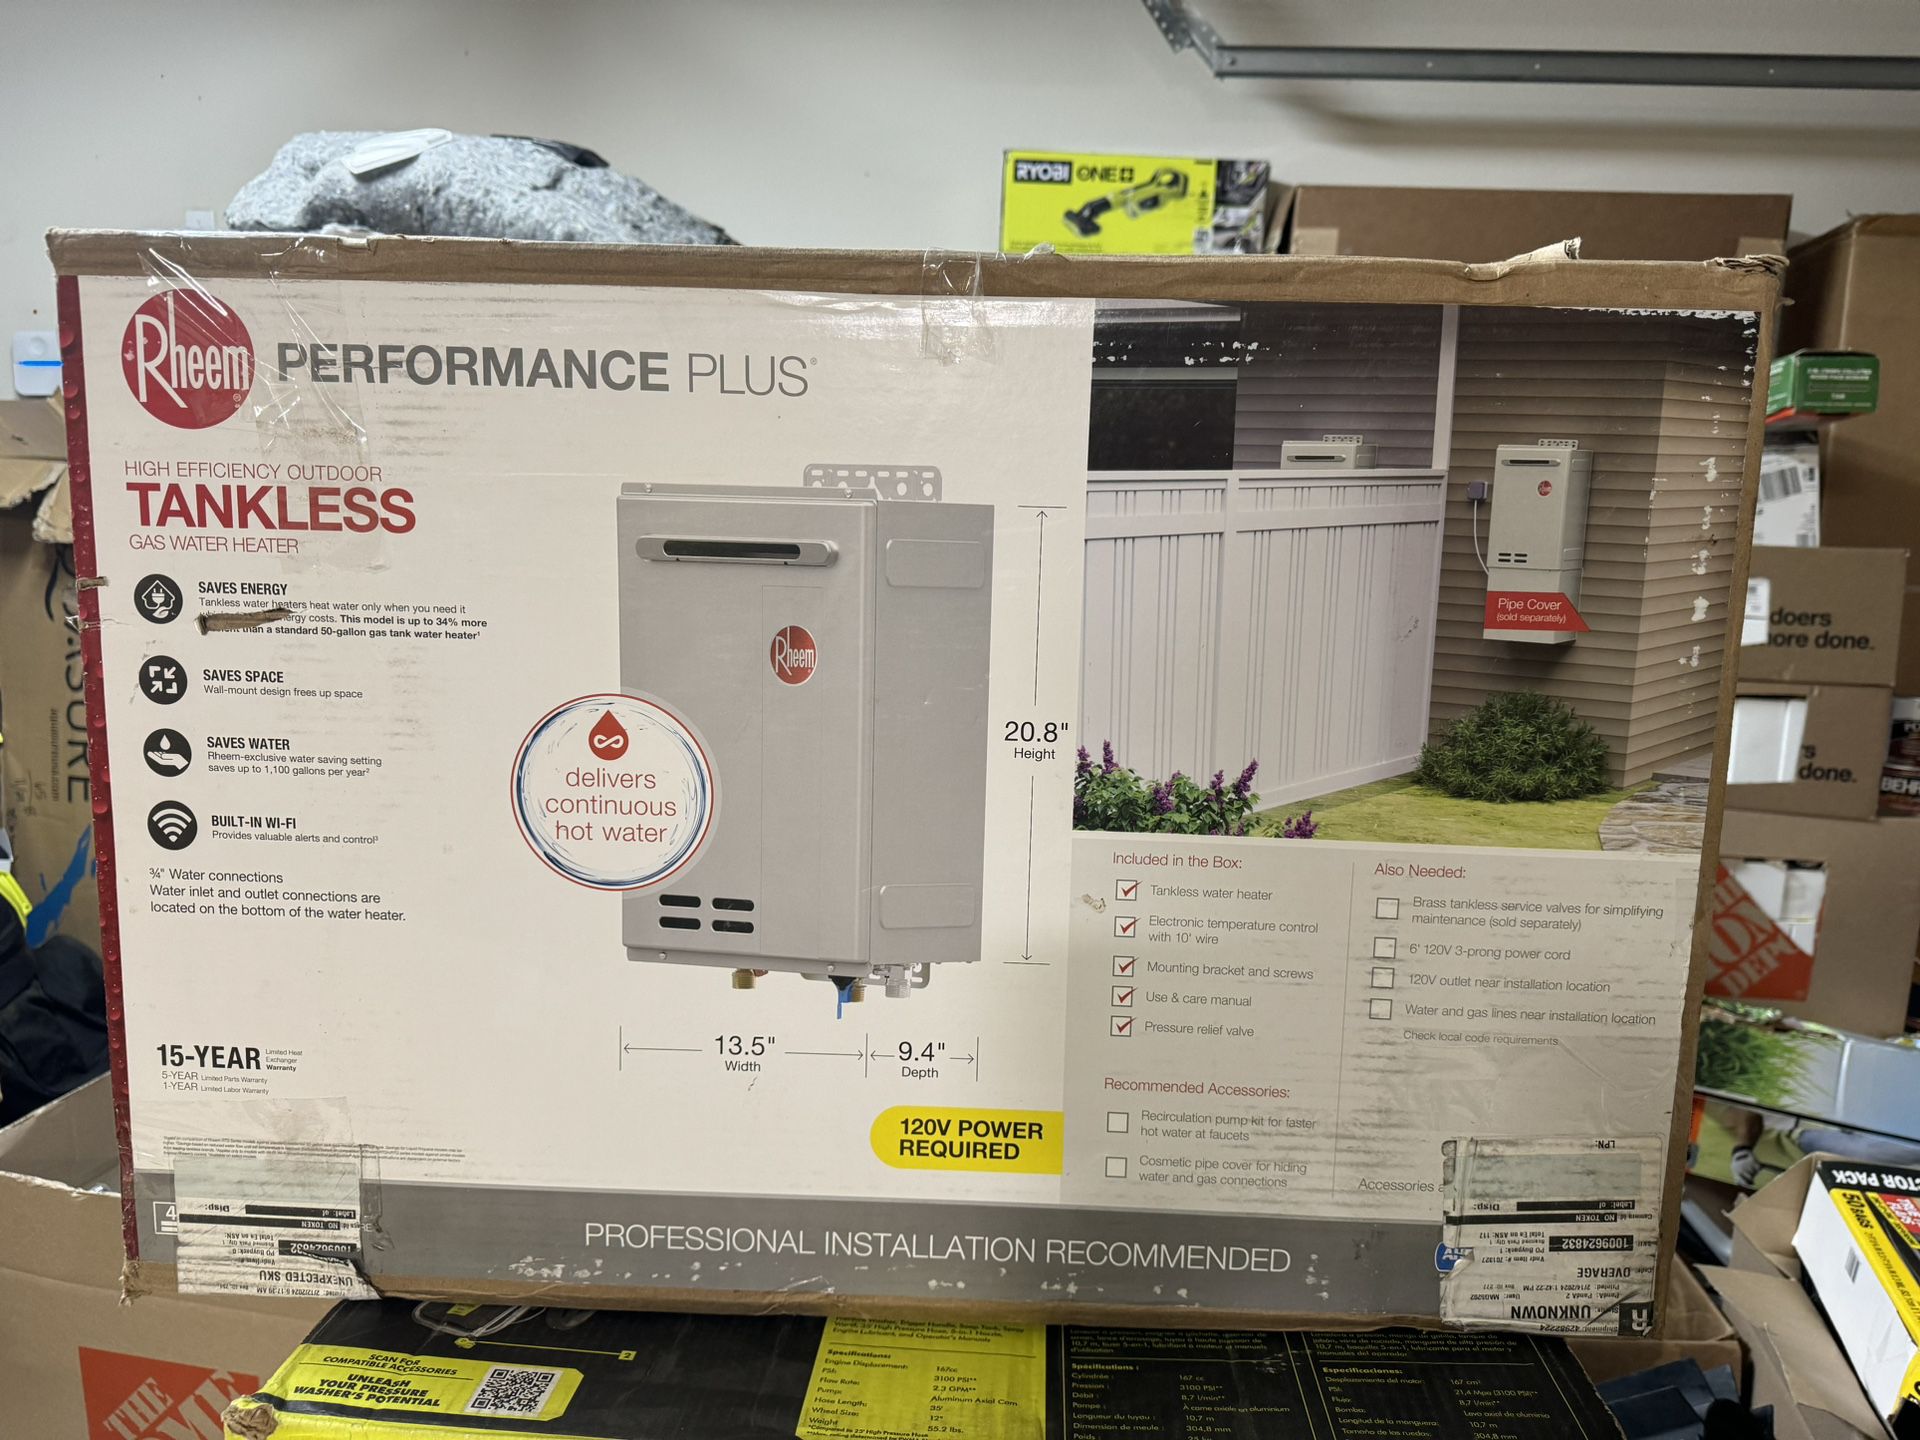 Performance Plus 9.5 GPM Natural Gas Outdoor Smart non-condensing Tankless Water Heater